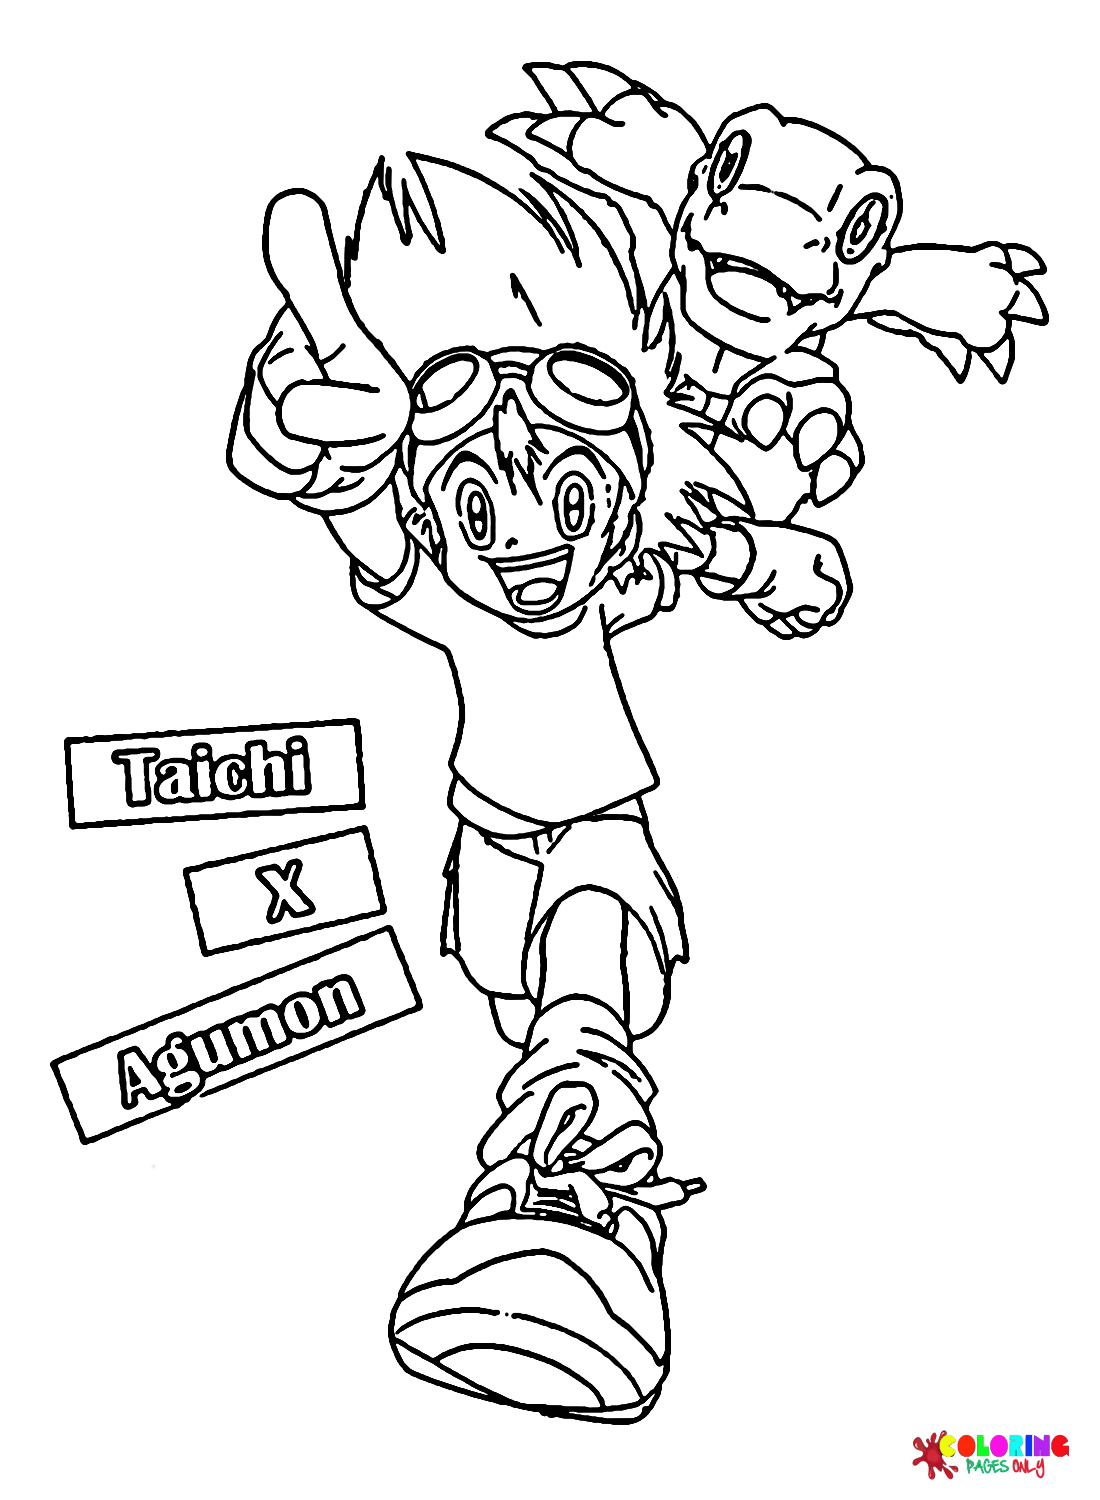 Digimon Taichi and Agumon Coloring Page - Free Printable Coloring Pages